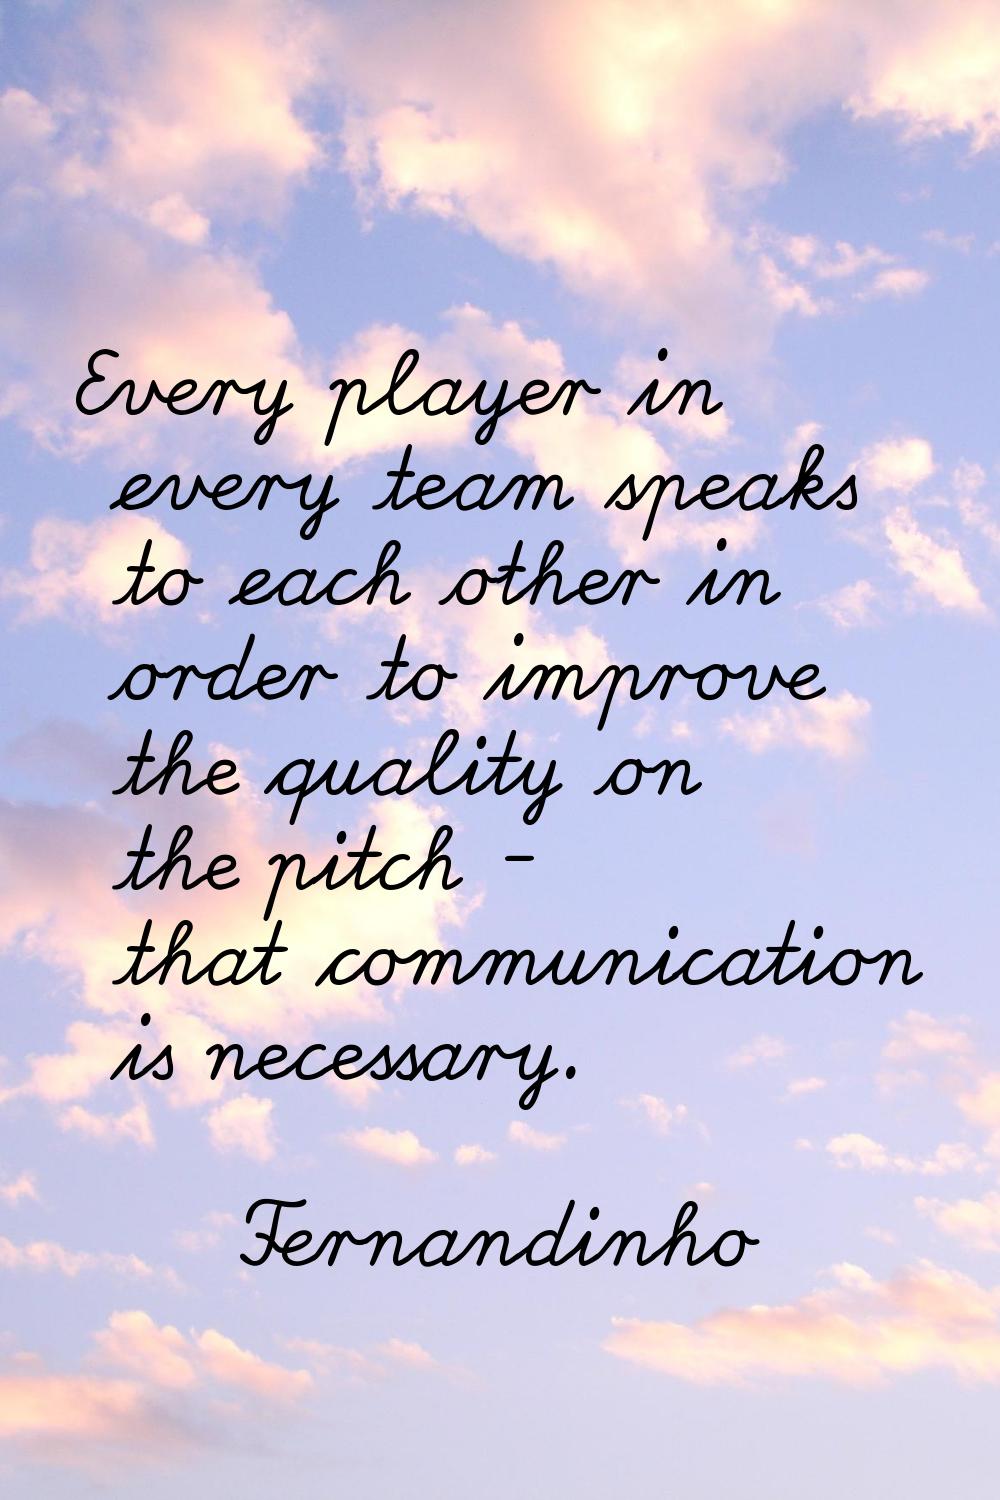 Every player in every team speaks to each other in order to improve the quality on the pitch - that